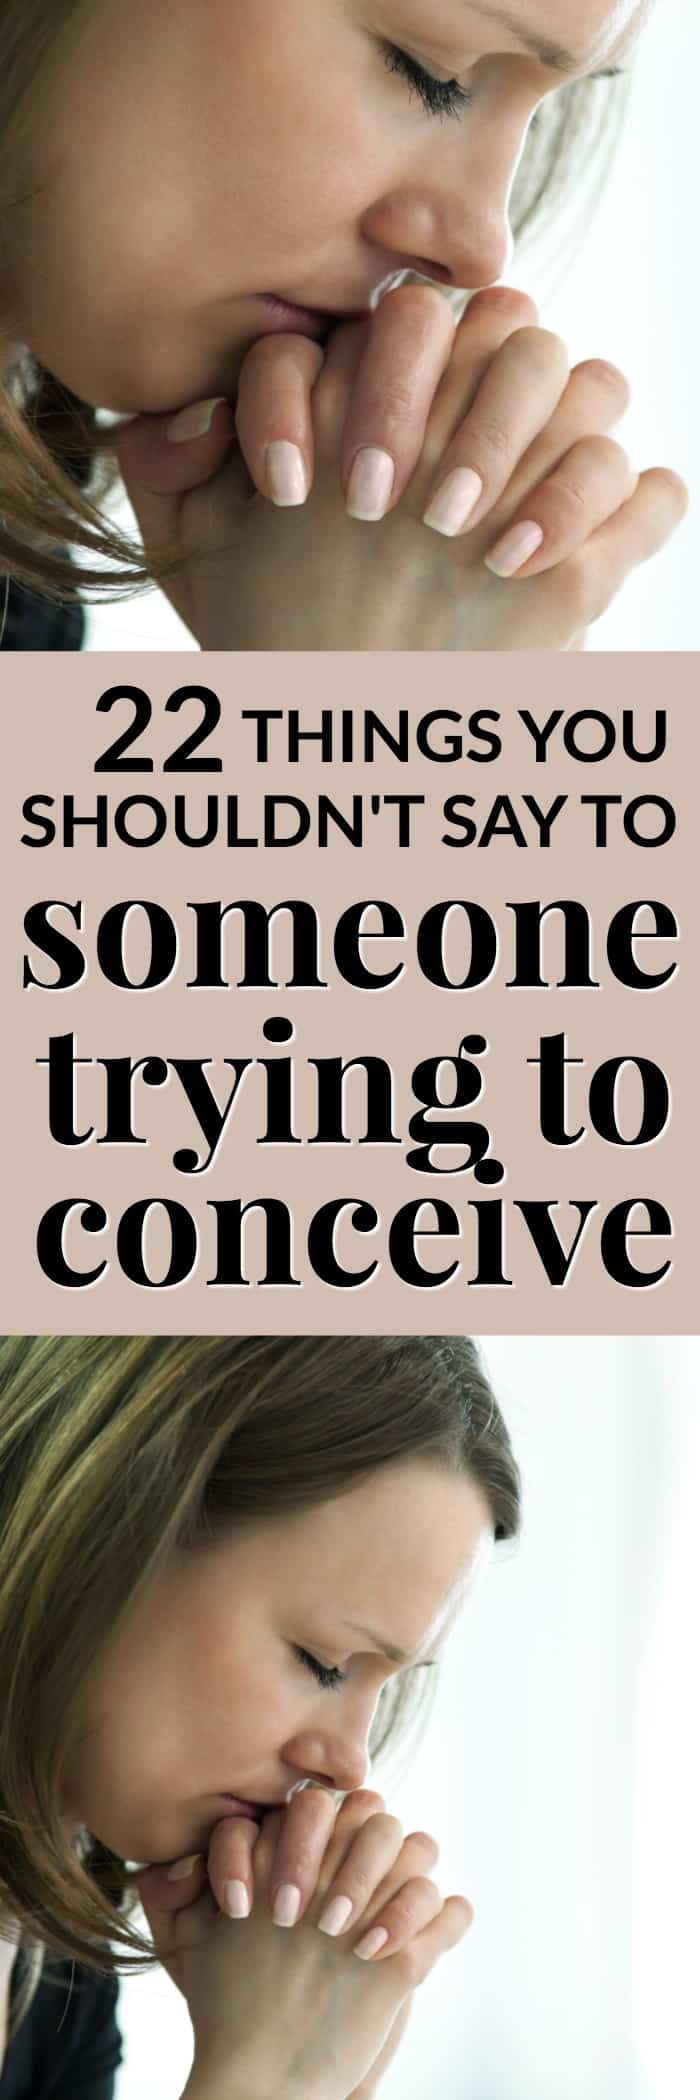 22 THINGS YOU SHOULDN'T SAY TO SOMEONE TRYING TO CONCEIVE